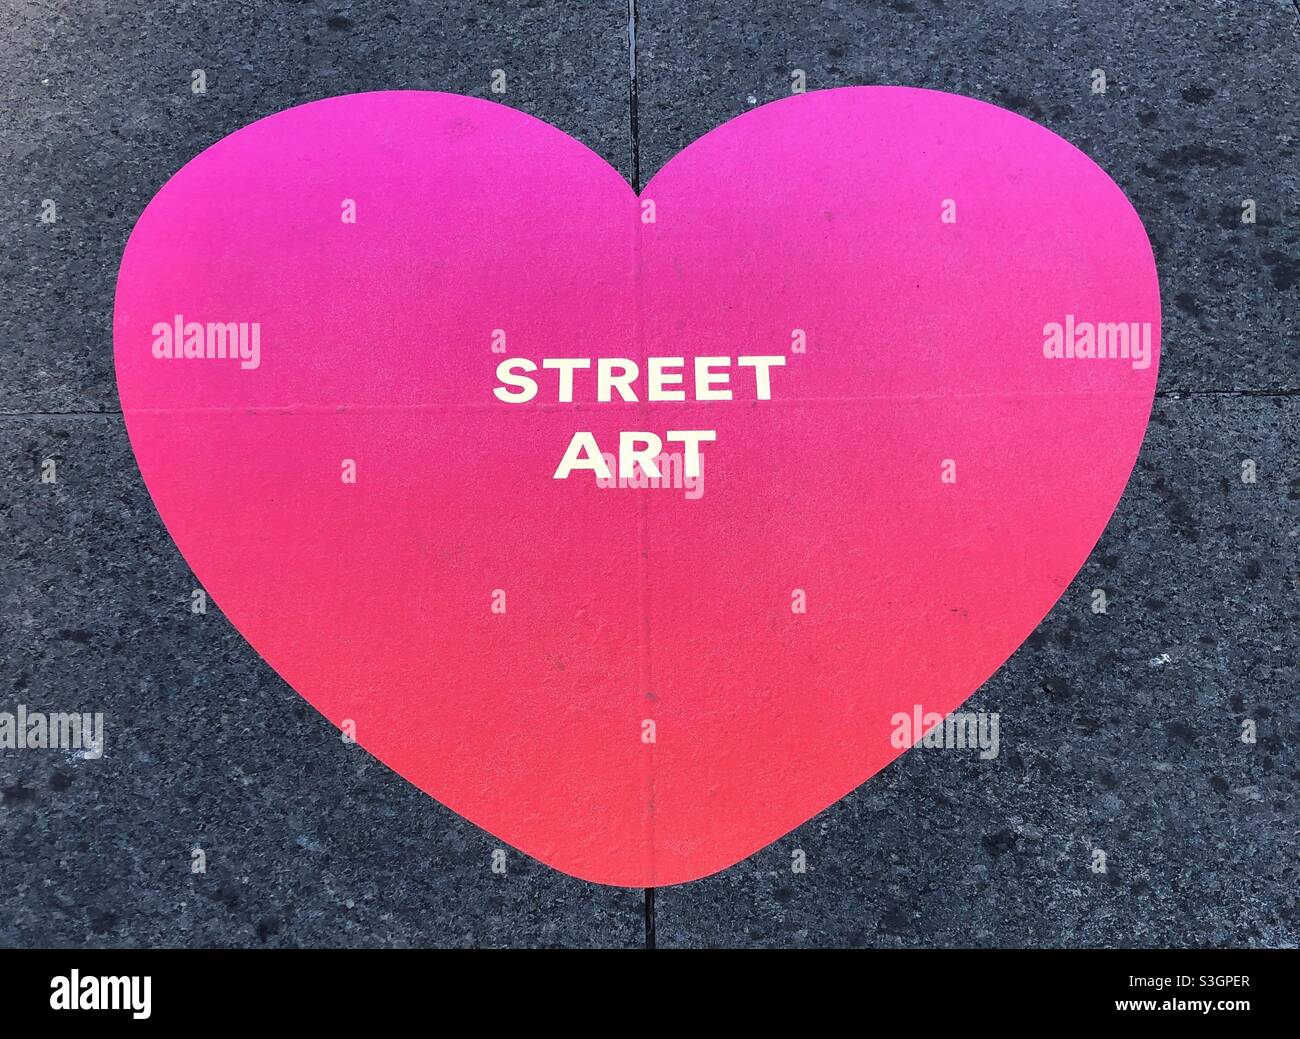 A pink heart sticker on the ground. Stock Photo